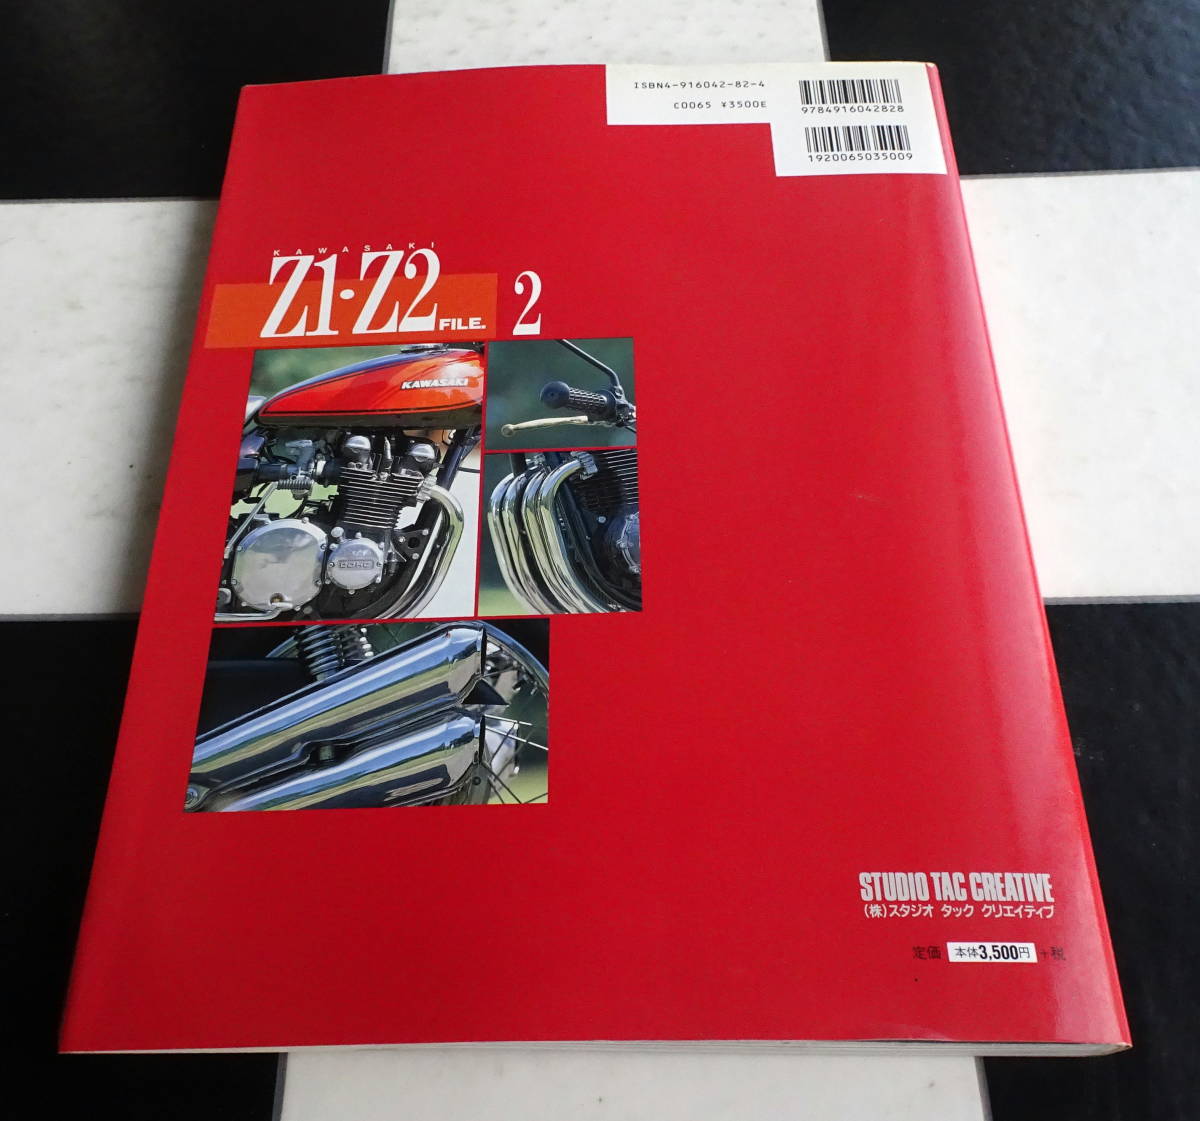 【Kawasaki】Z1 ・Z2 File.2 カワサキ ゼット ファイル 900RS SUPER FOUR メンテナンス Z1 Assembly&Preparation Manual_画像4